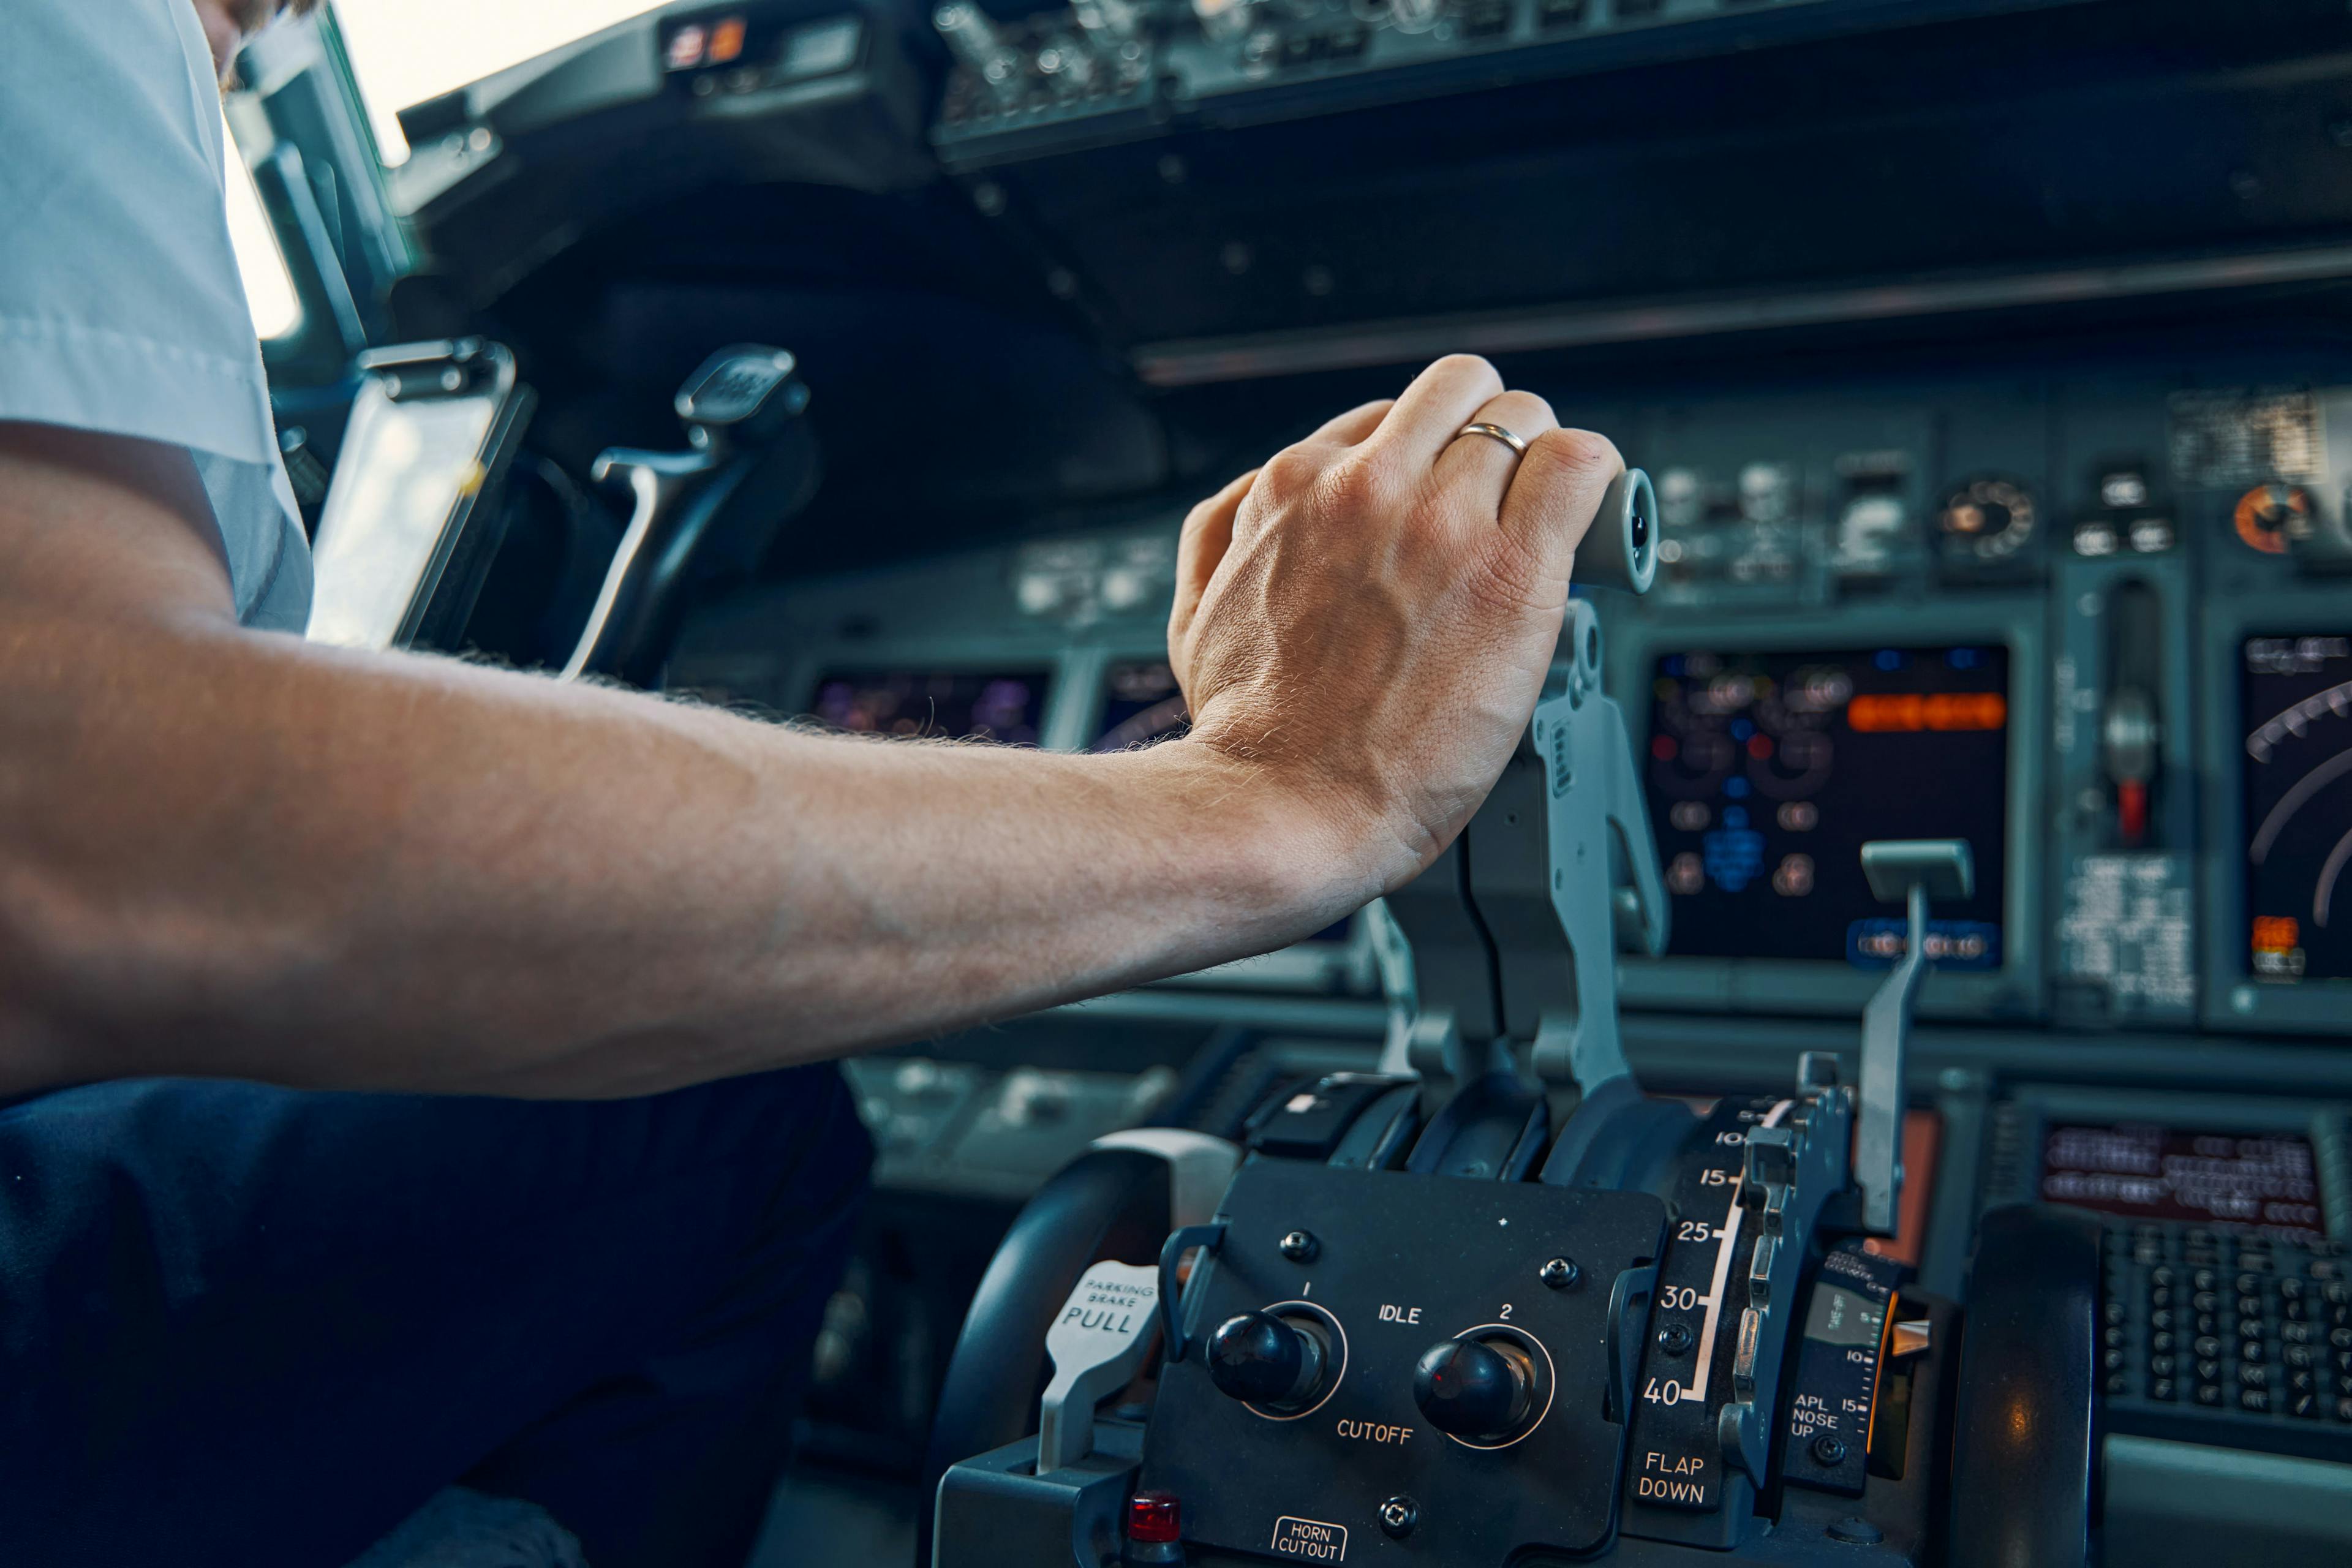 Pilot's hand engages the throttle in the cockpit of an airplane